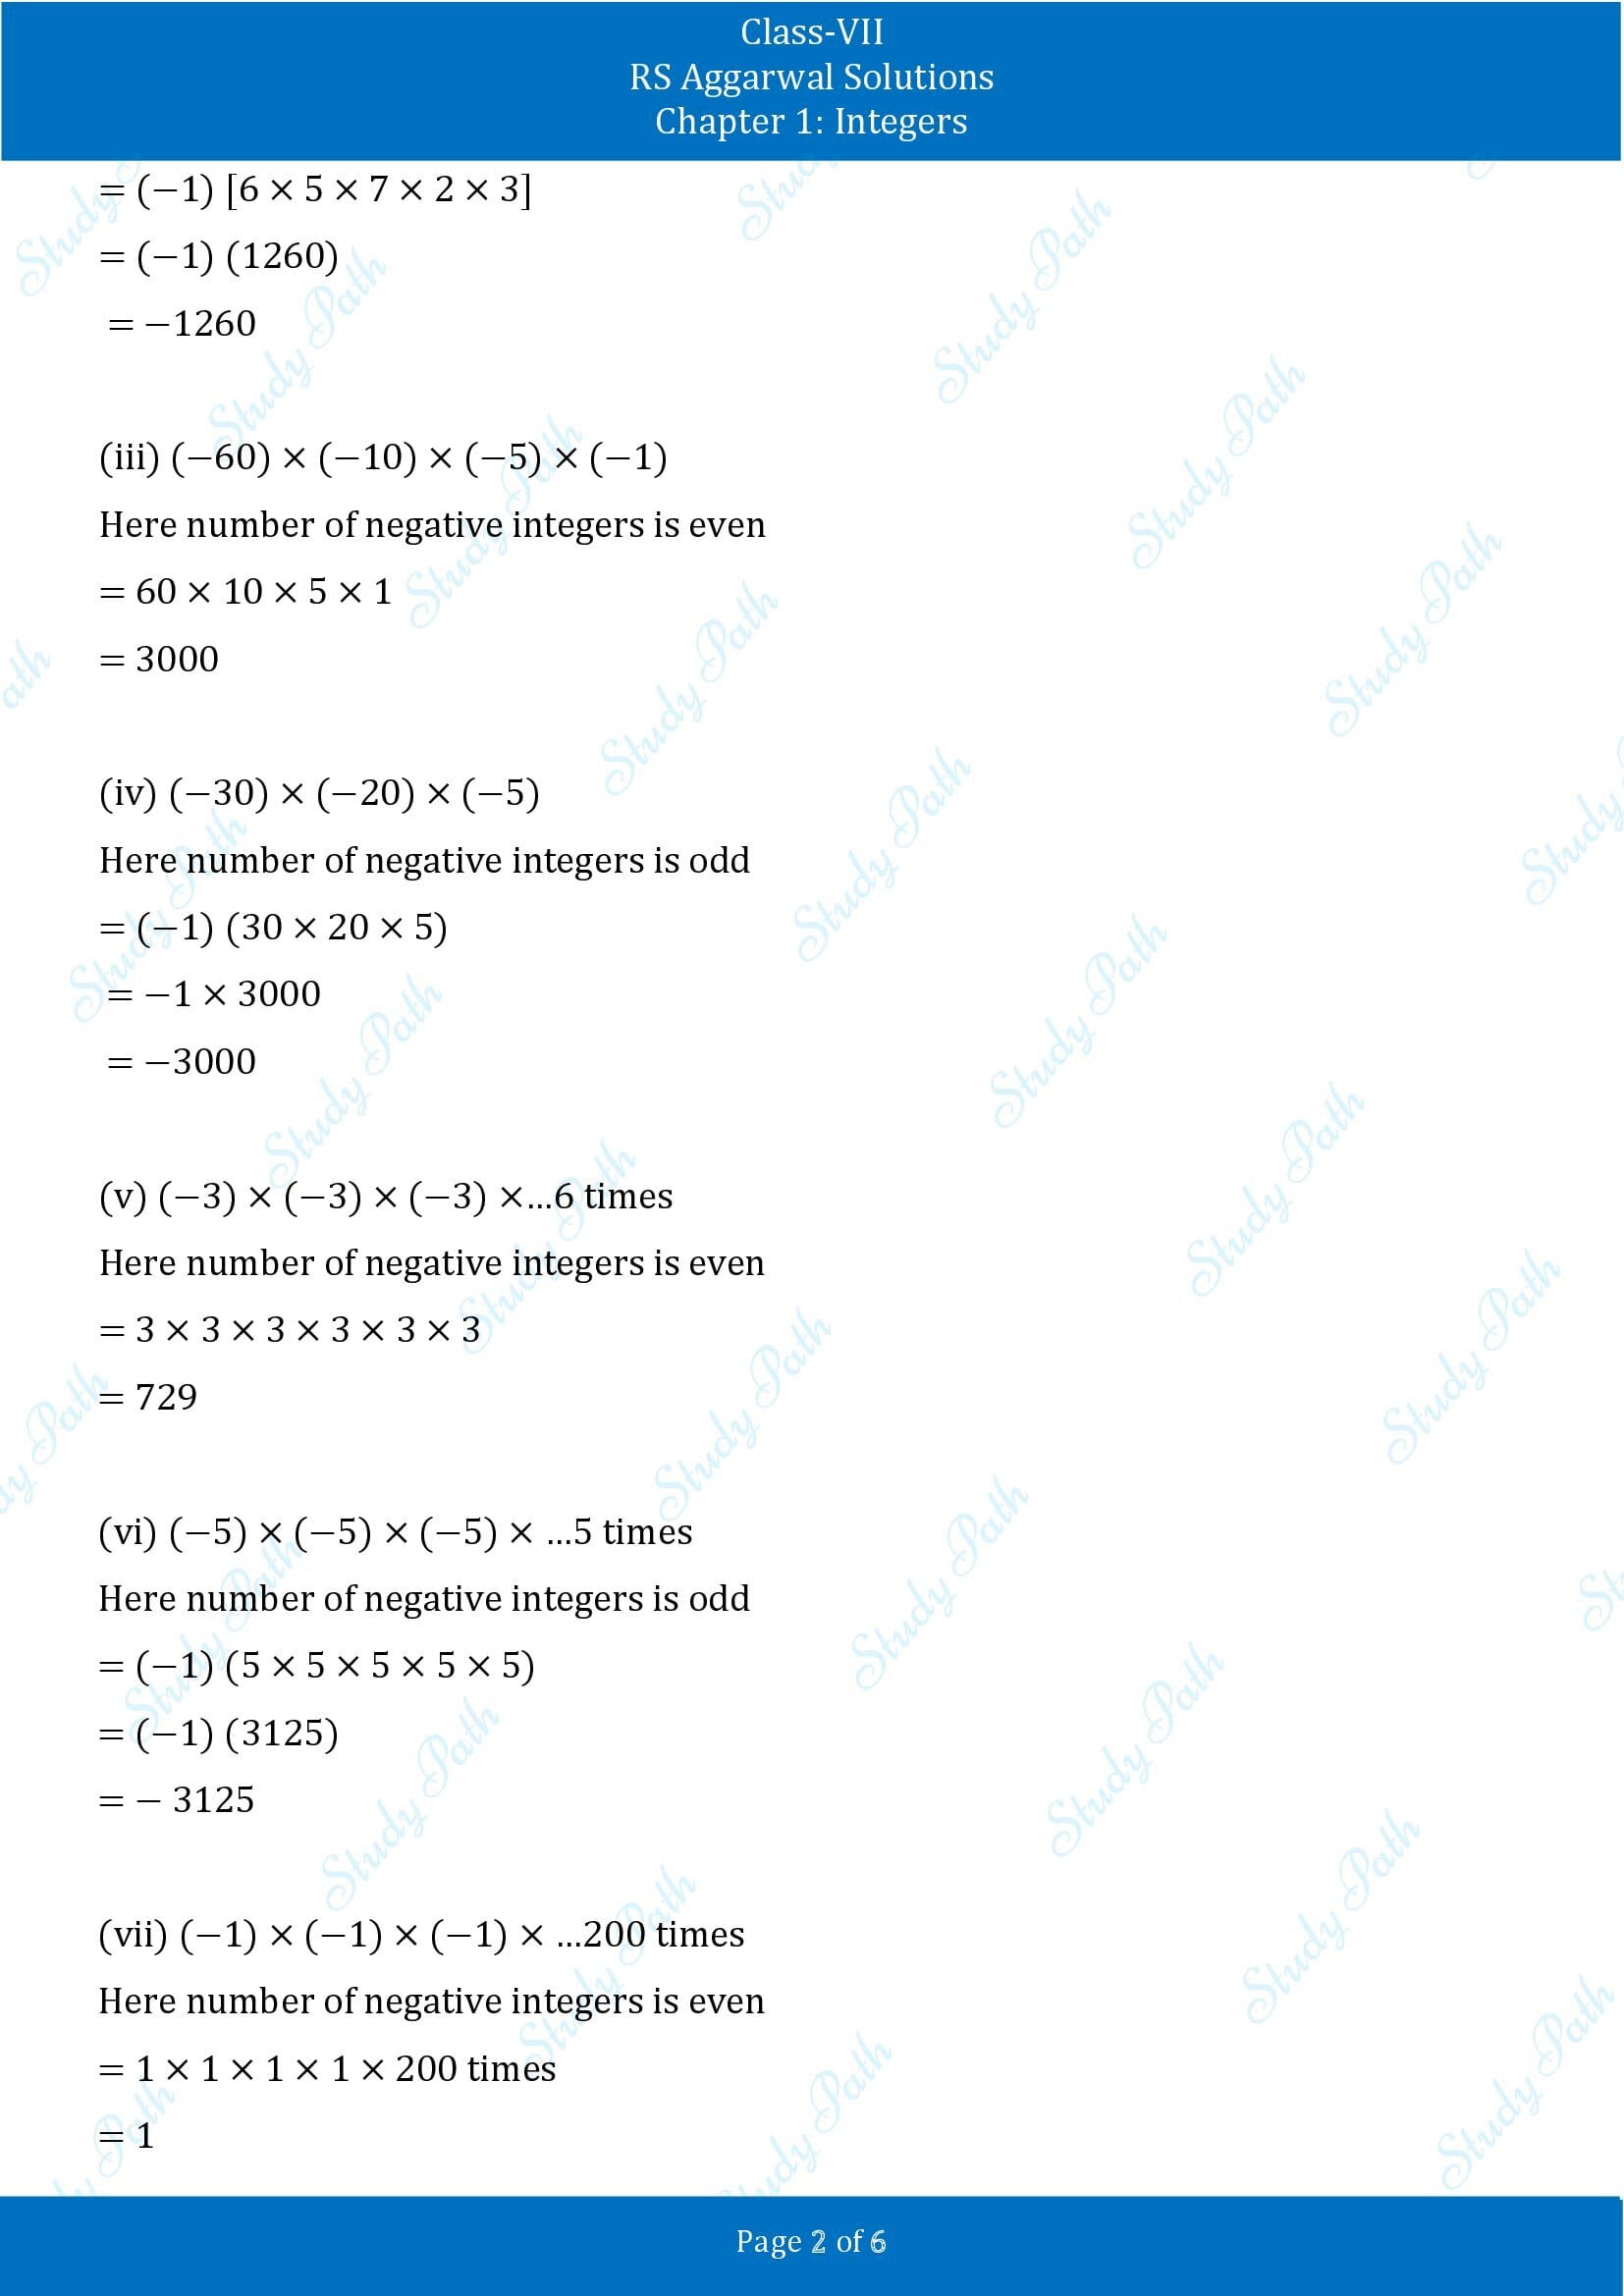 RS Aggarwal Solutions Class 7 Chapter 1 Integers Exercise 1B 00002